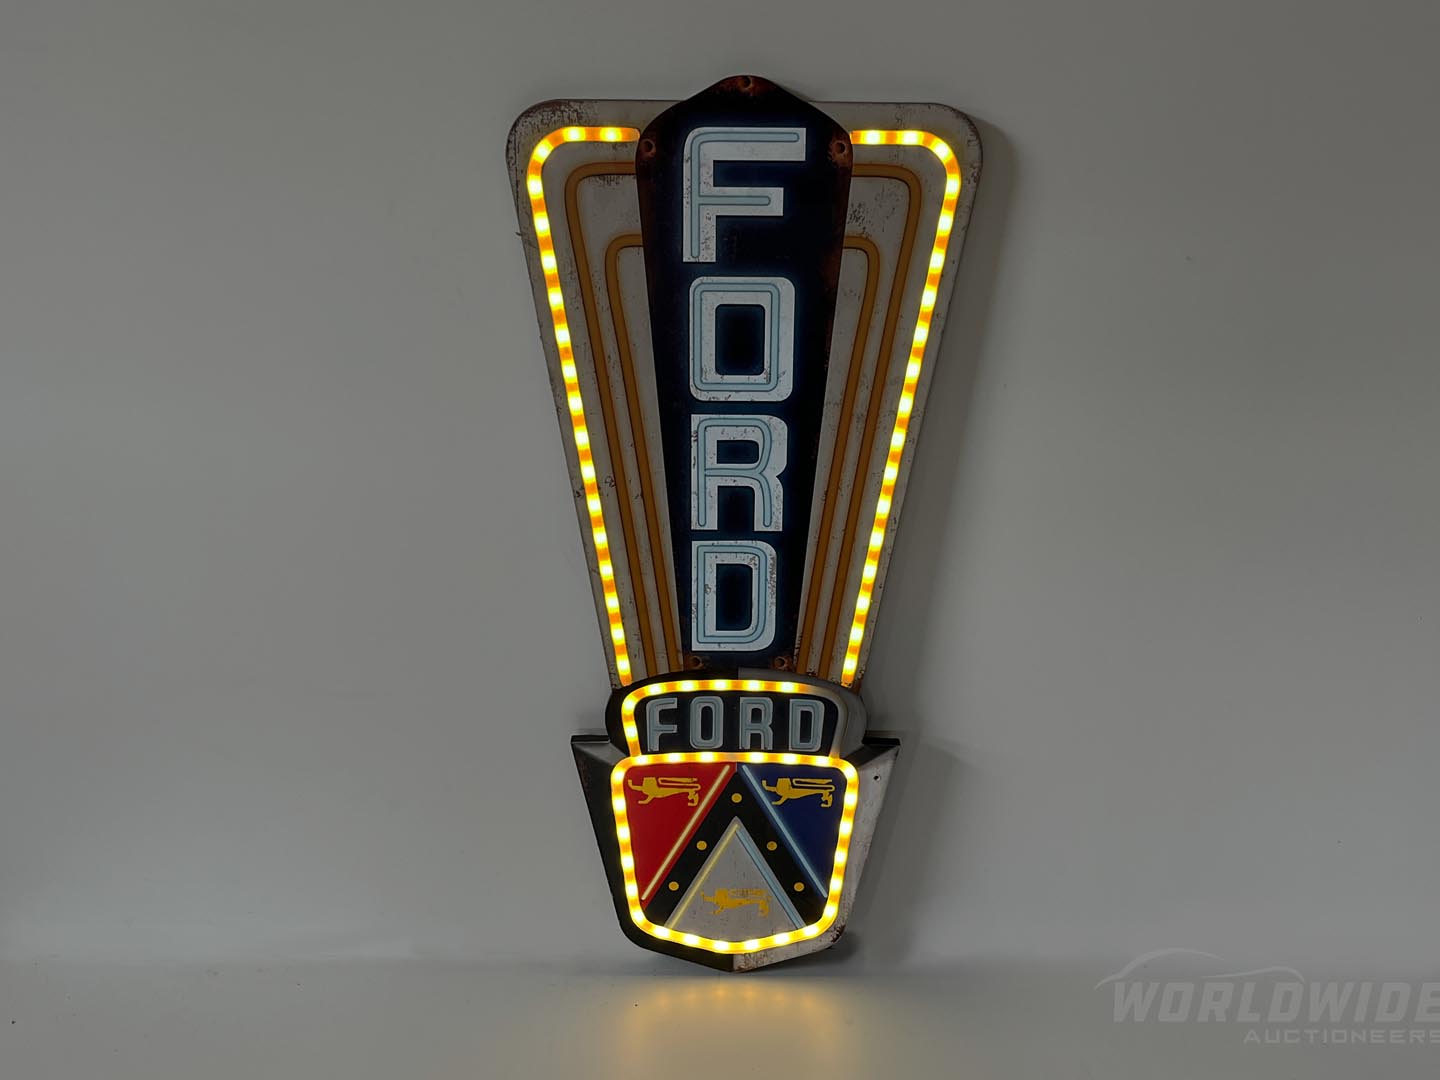 Ford Jubilee LED Illuminated Sign - New Issue